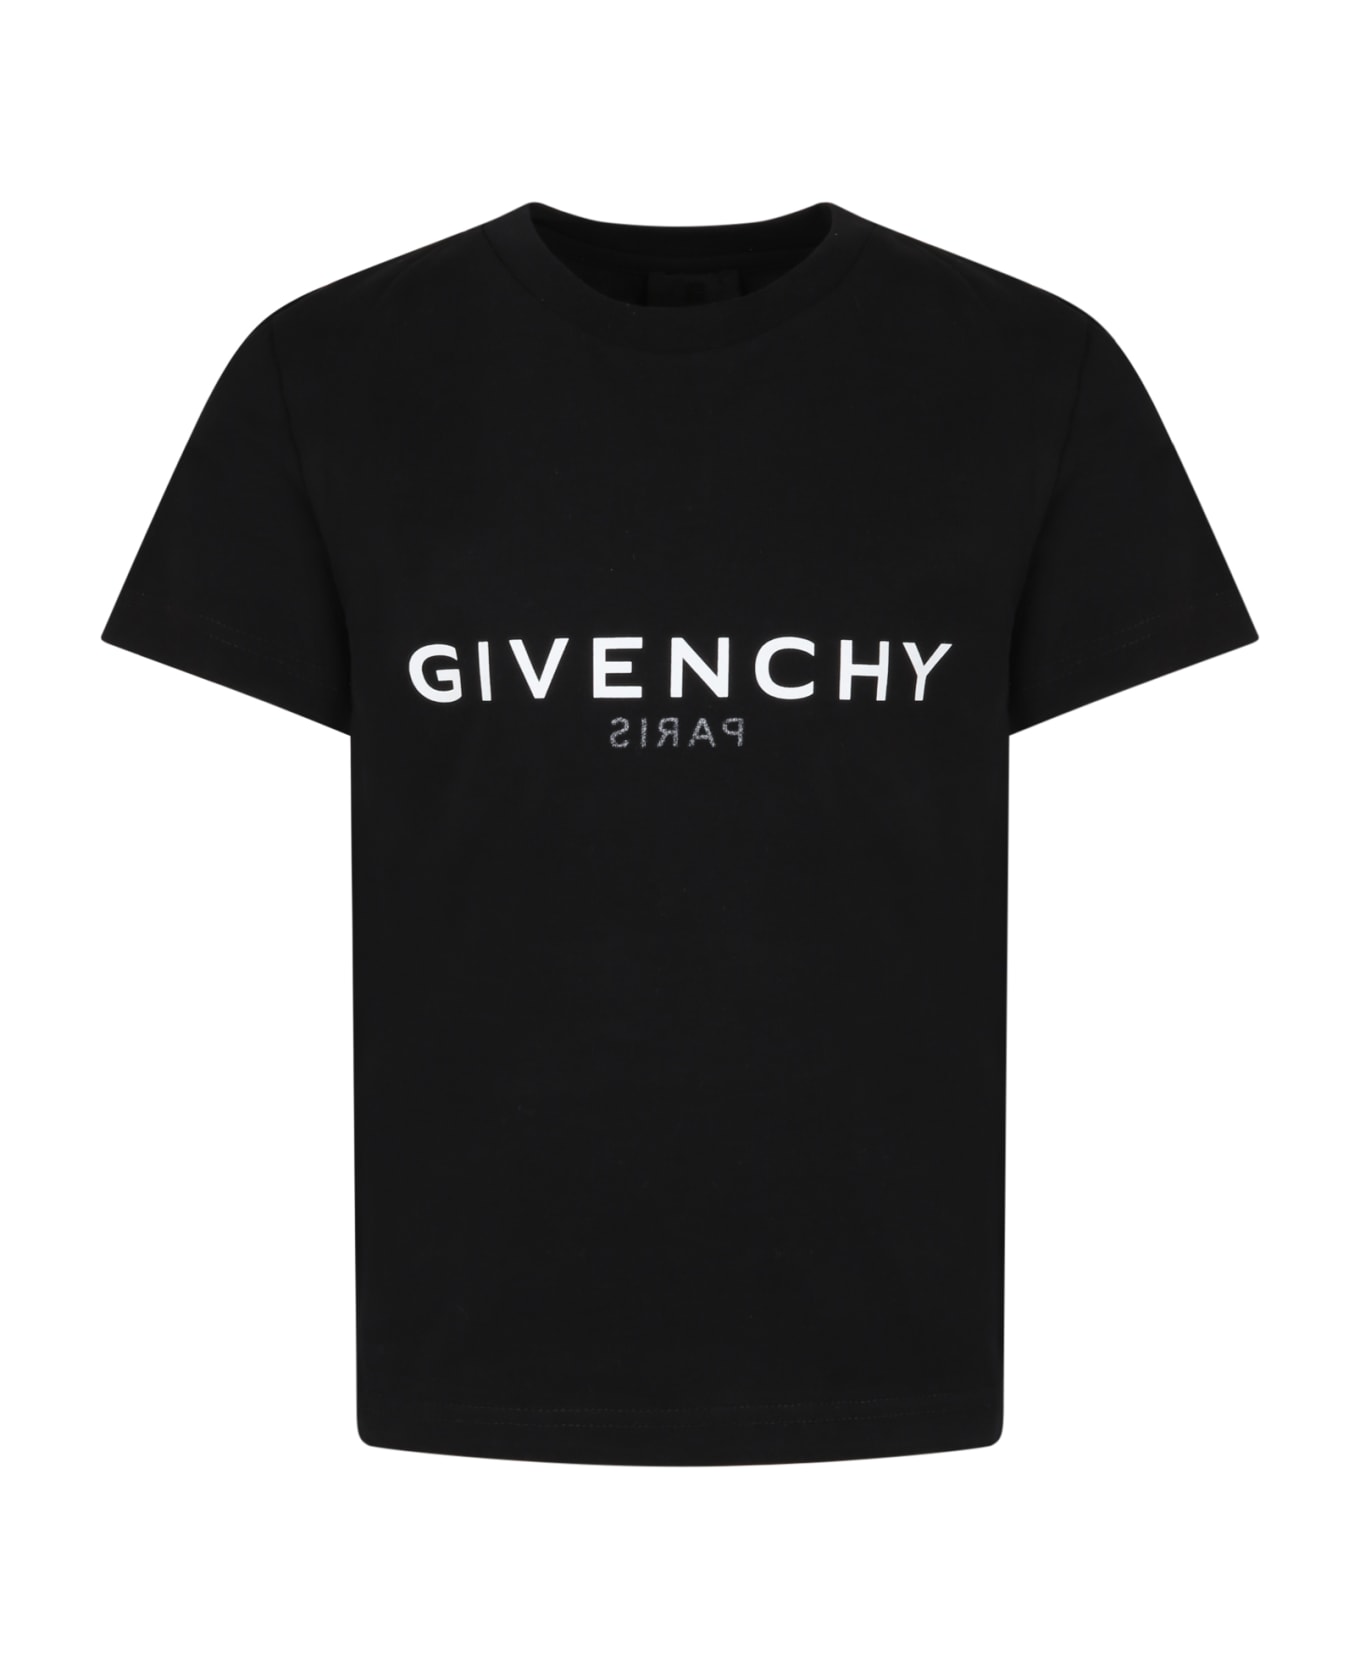 Givenchy Black T-shirt For Boy With White Logo - Black